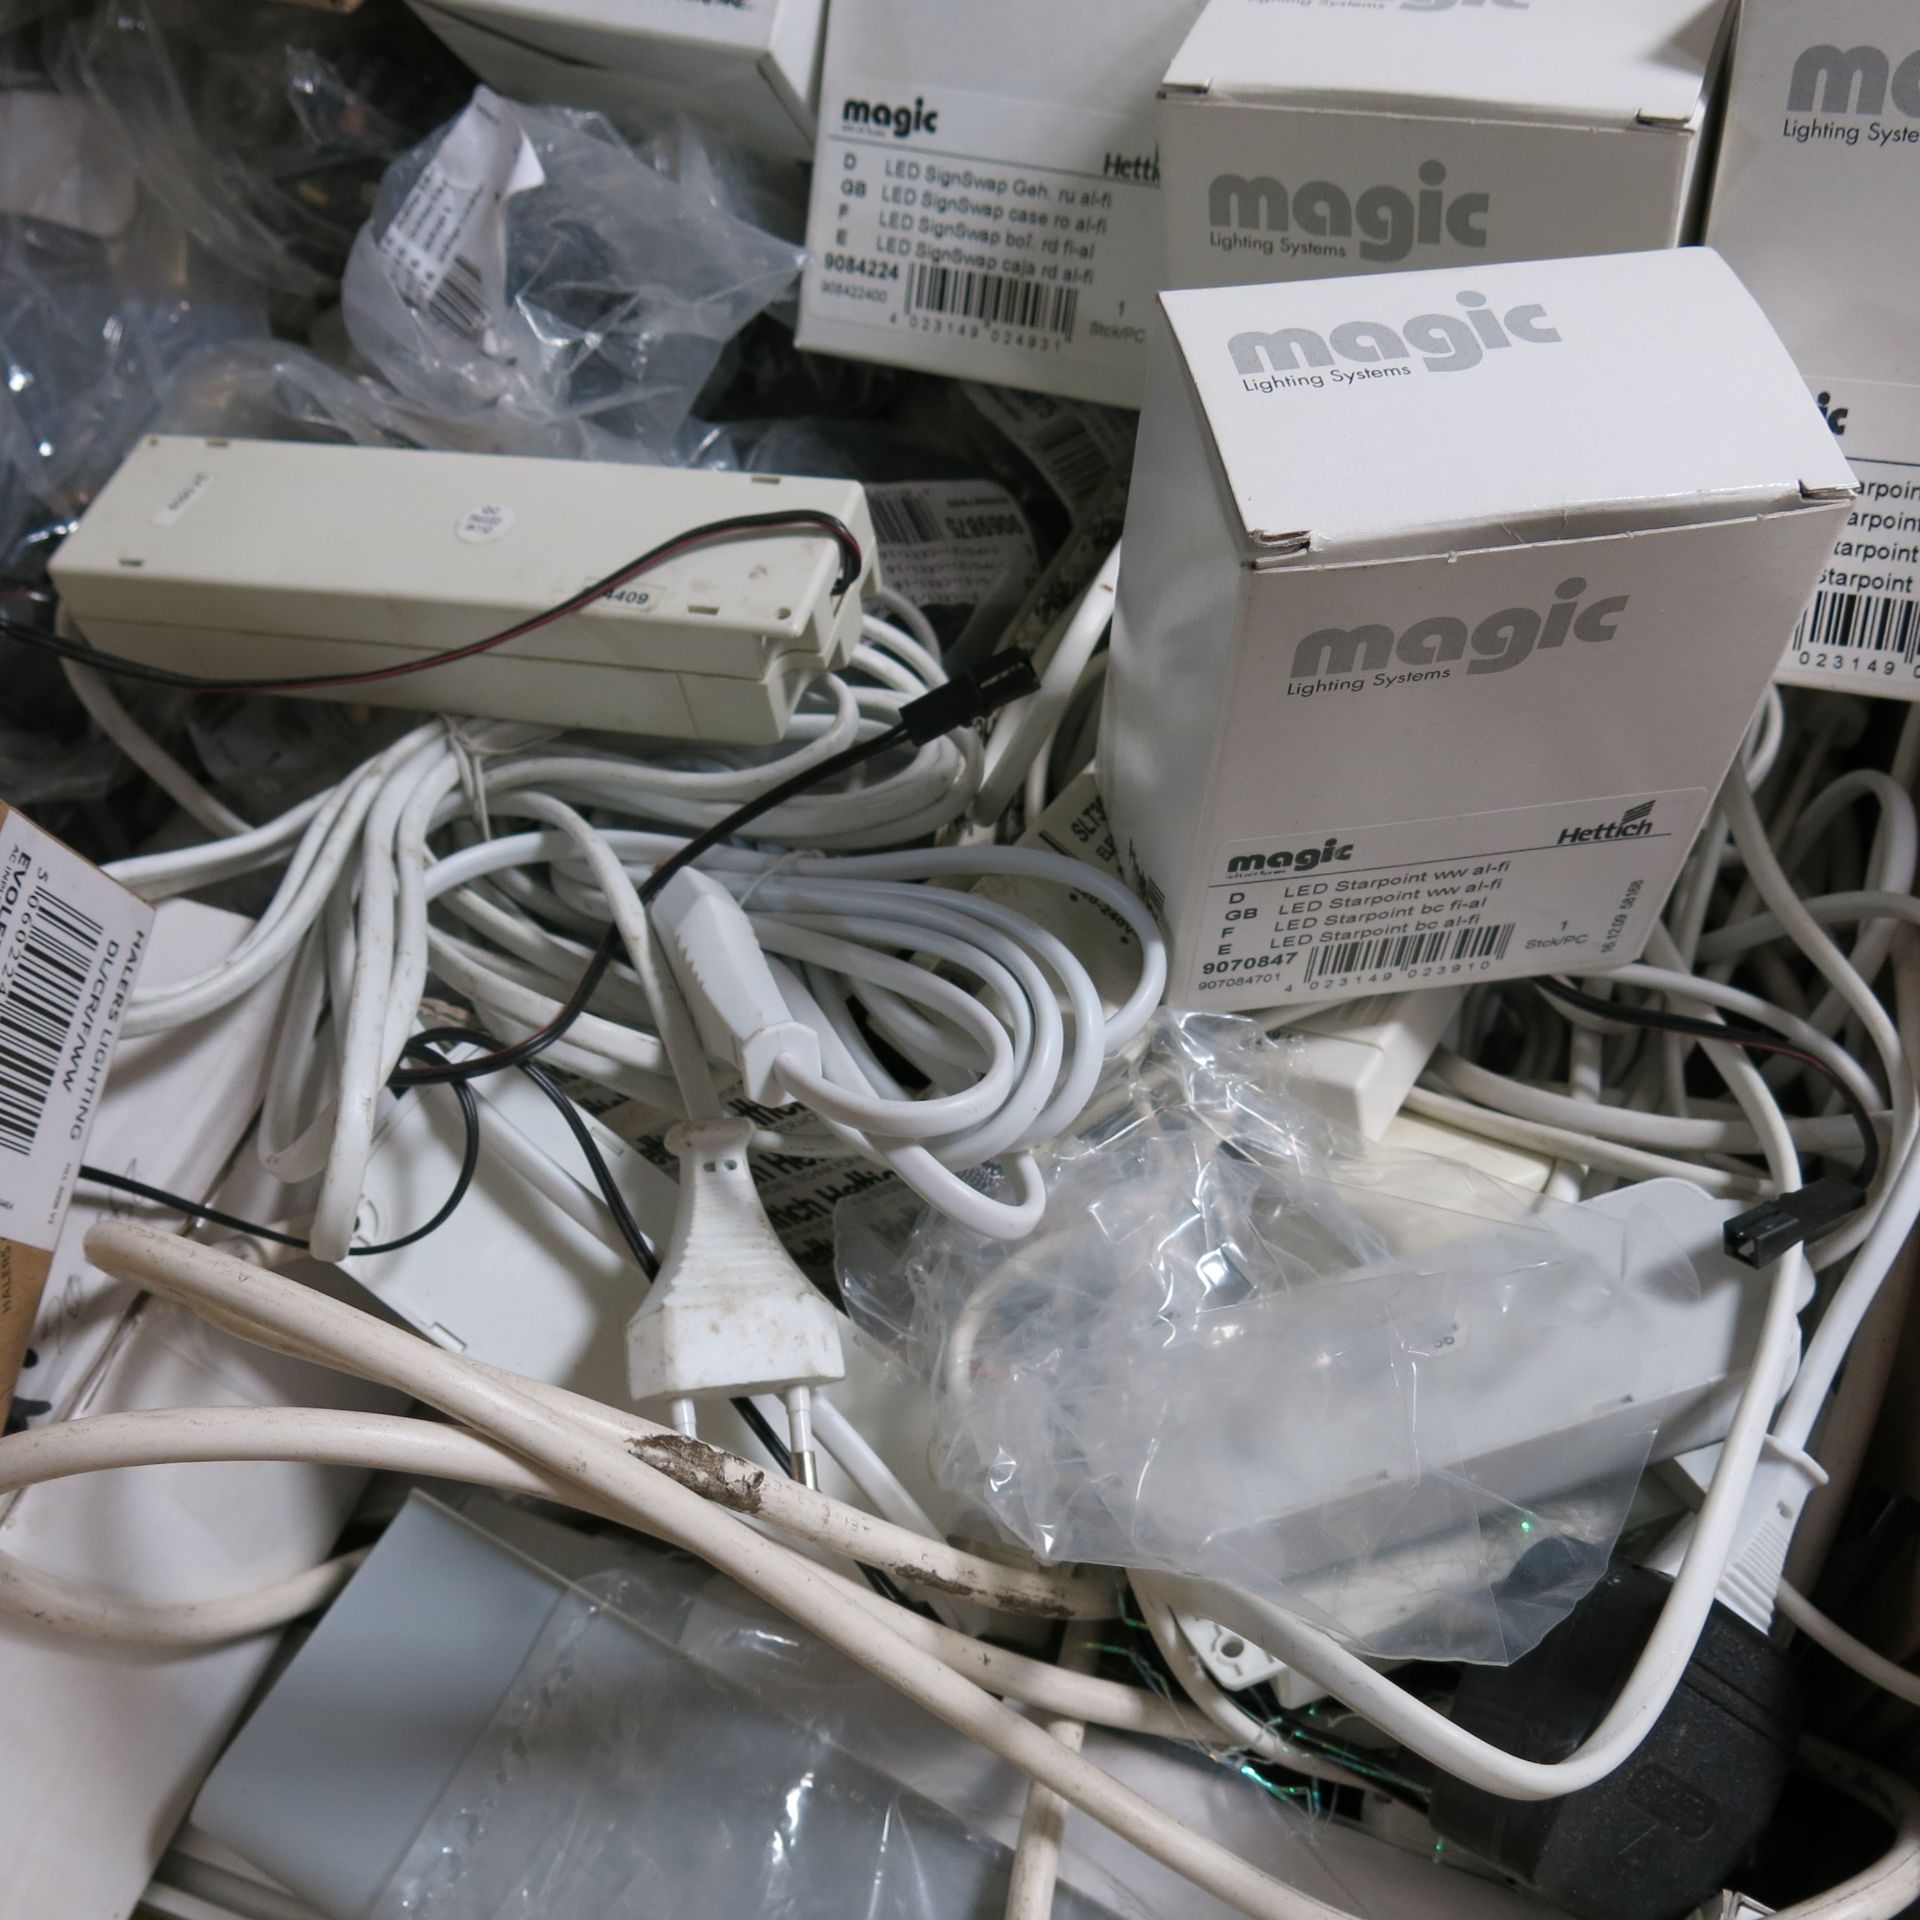 2 x Boxes of Assorted Kitchen Lights to Include: Magic, Saxby & Sensio, Undercounter Led, - Image 8 of 8